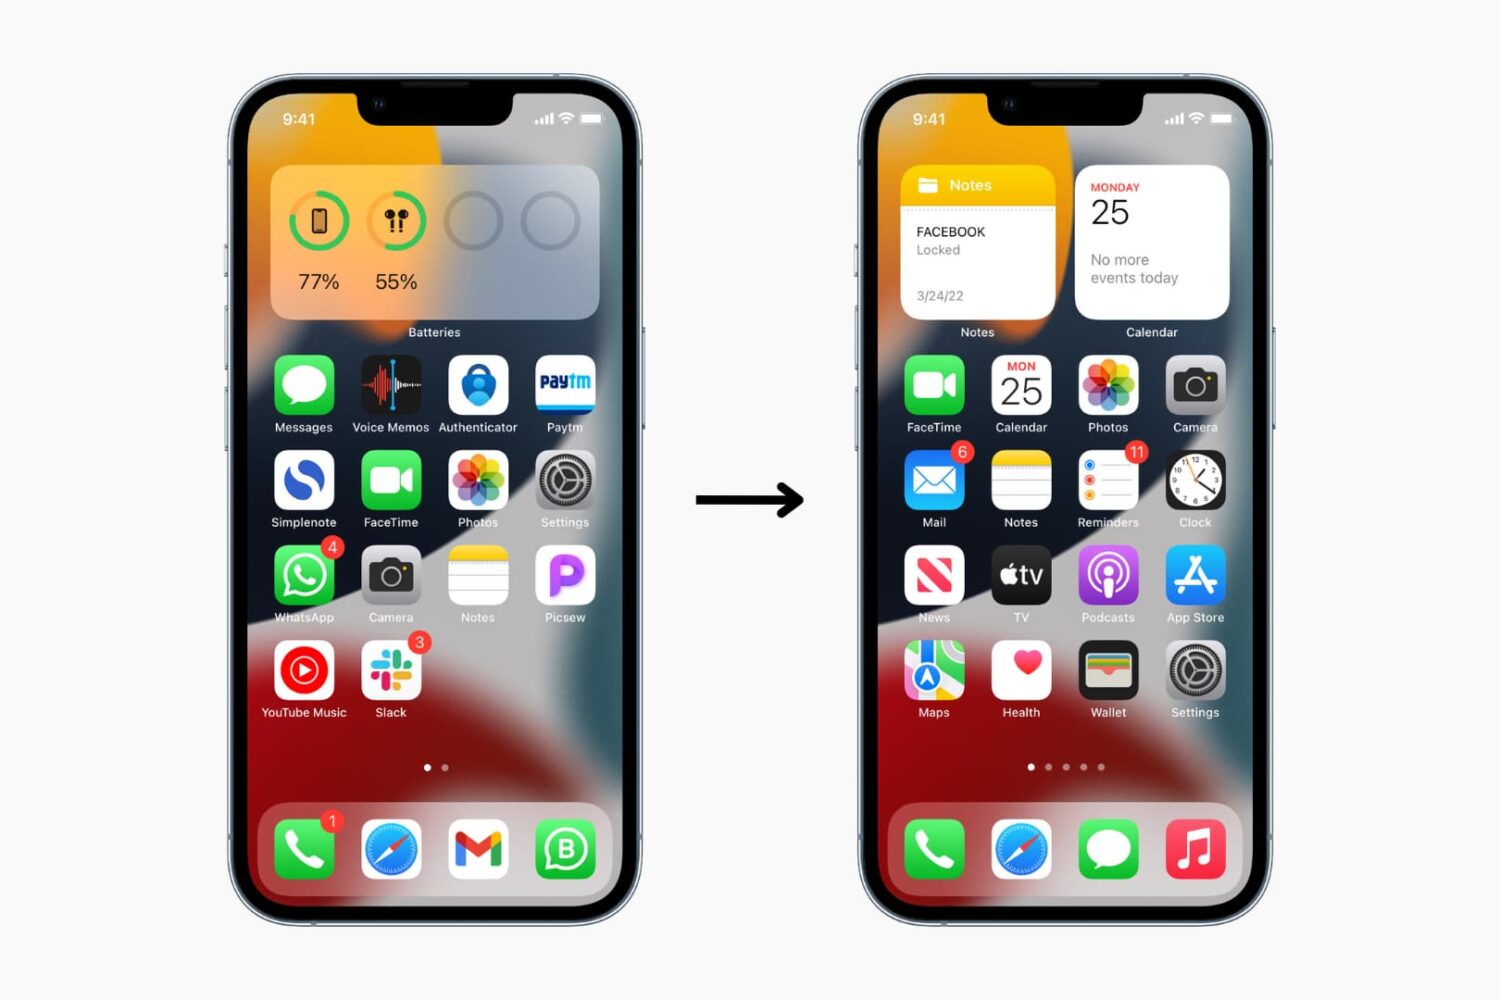 Two iPhones on a light background with first iPhone showing personalized Home Screen and the second iPhone showing reset Home Screen layout